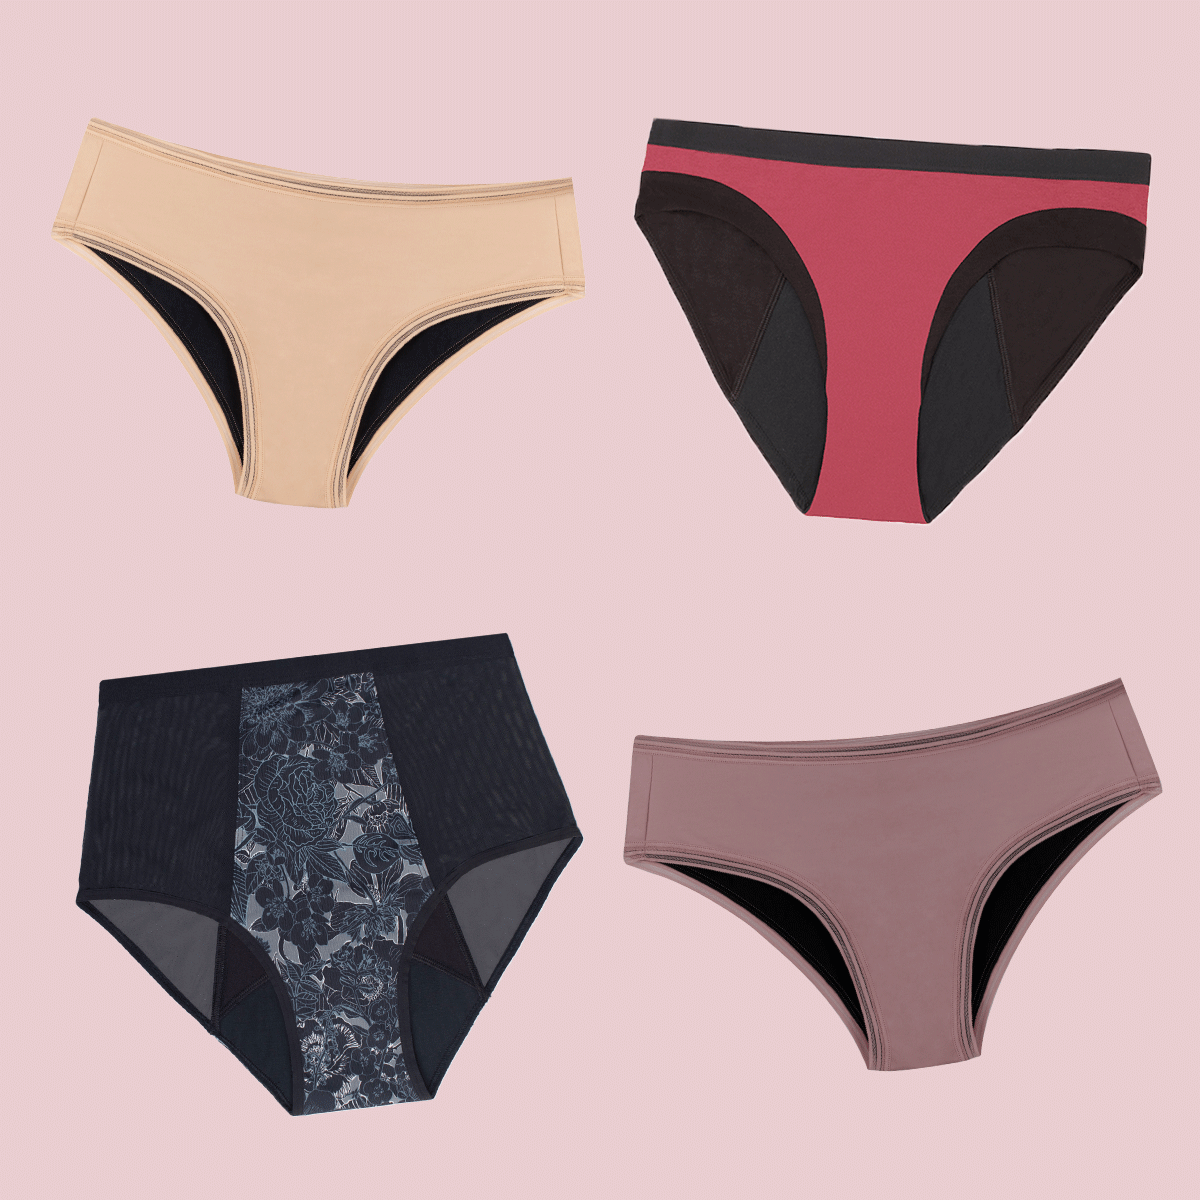 I tried out period-proof underwear - this is what happened